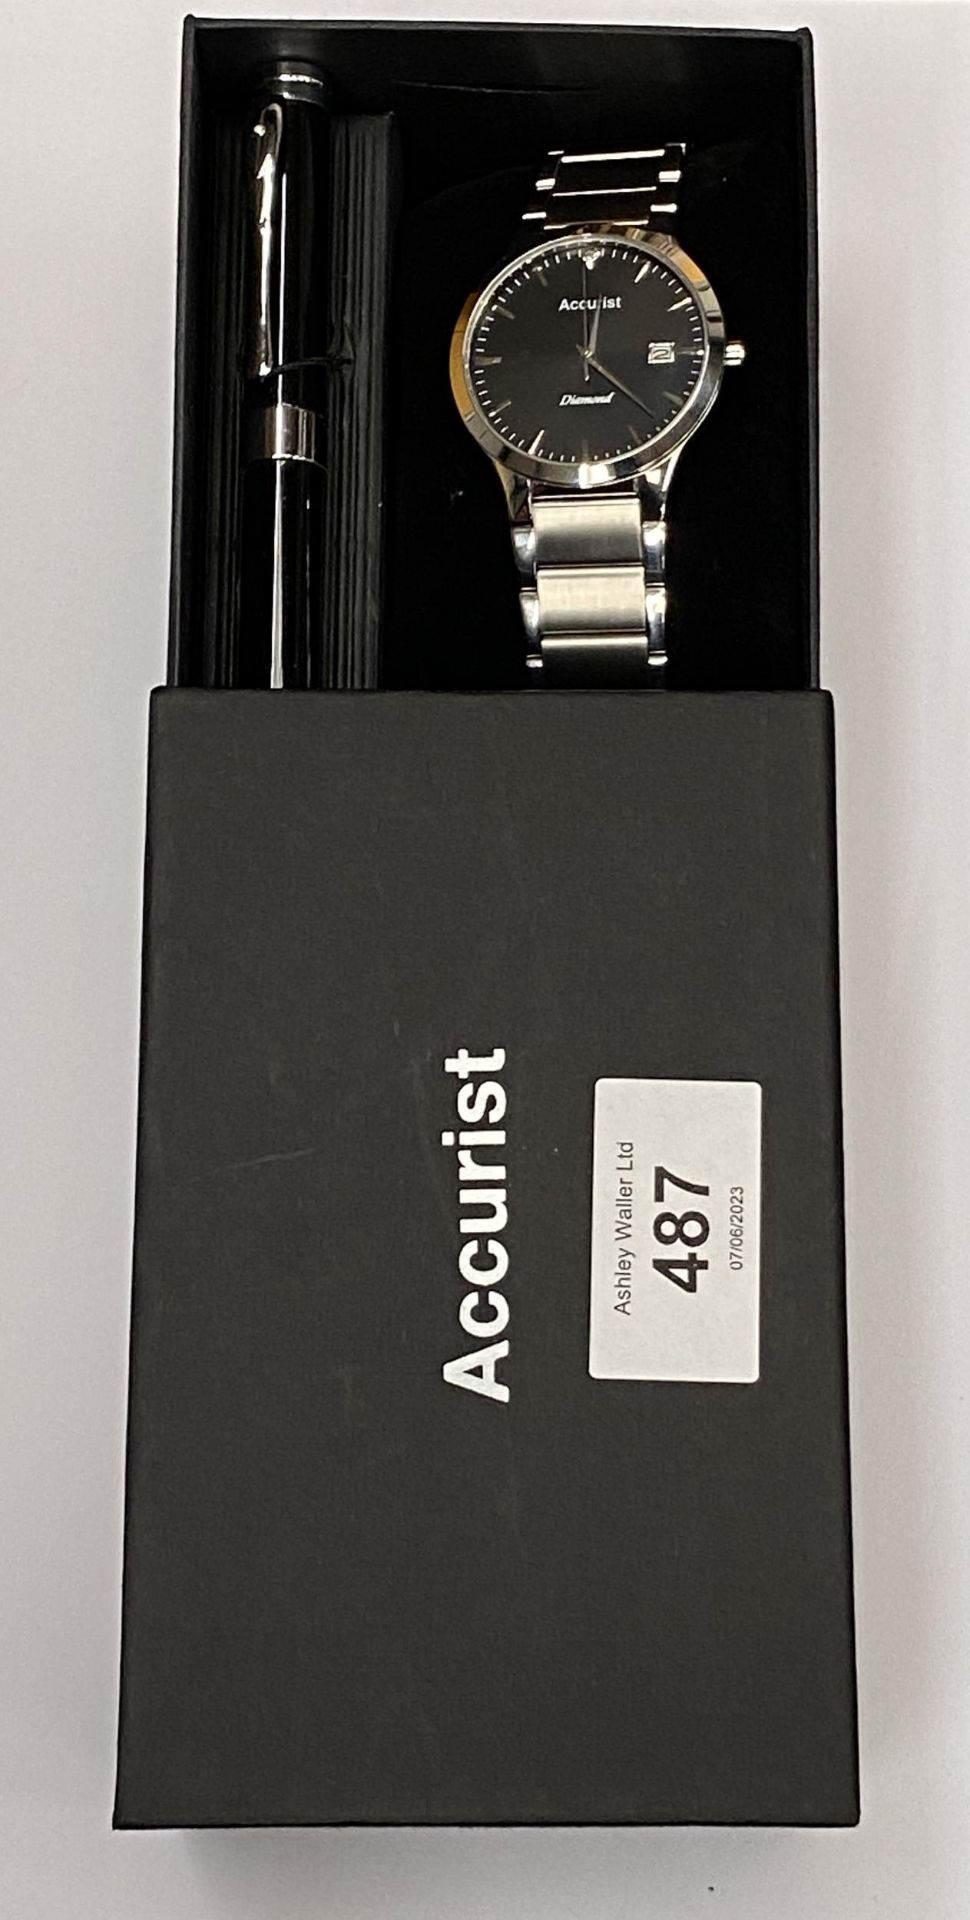 A BOXED ACCURIST WATCH AND PEN SET, WORKING AT TIME OF CATALOGUING BUT NO WARRANTY GIVEN